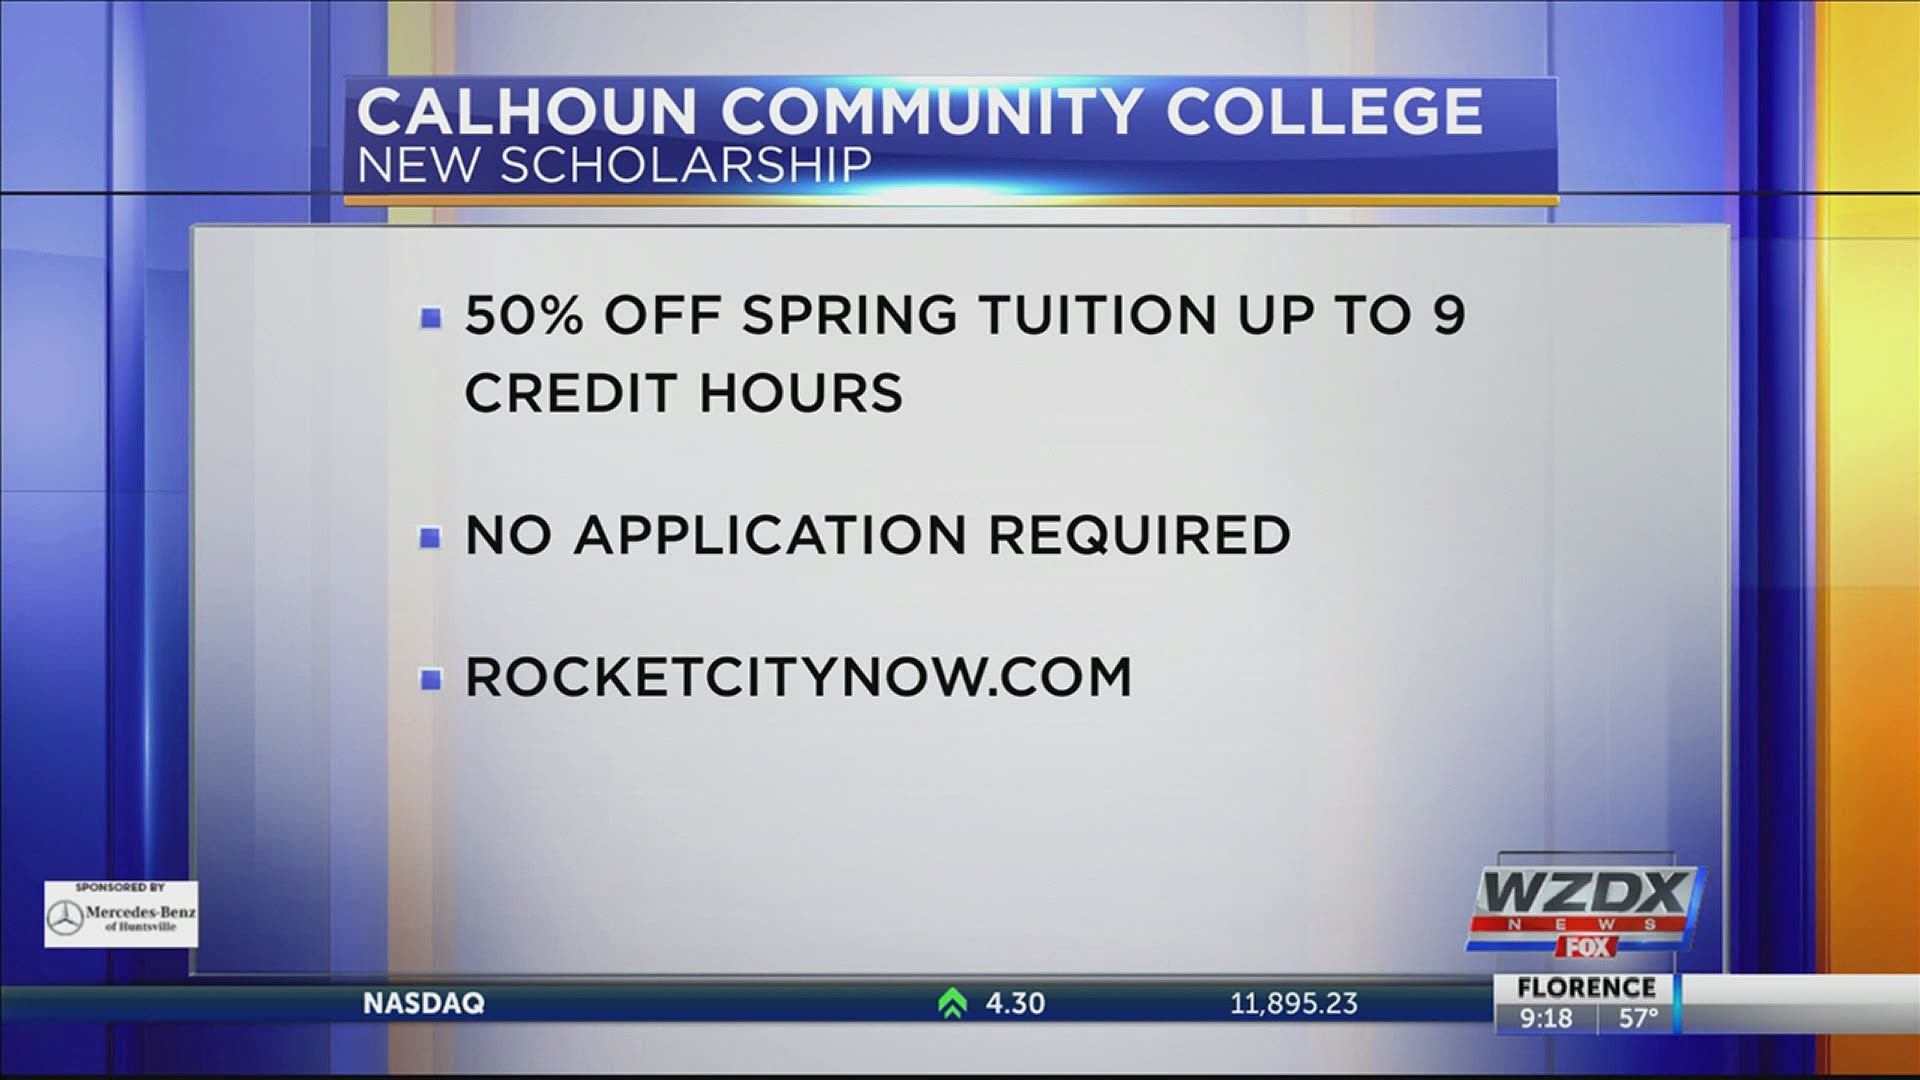 Calhoun Community College is offering a new scholarship for the Spring 2021 semester.